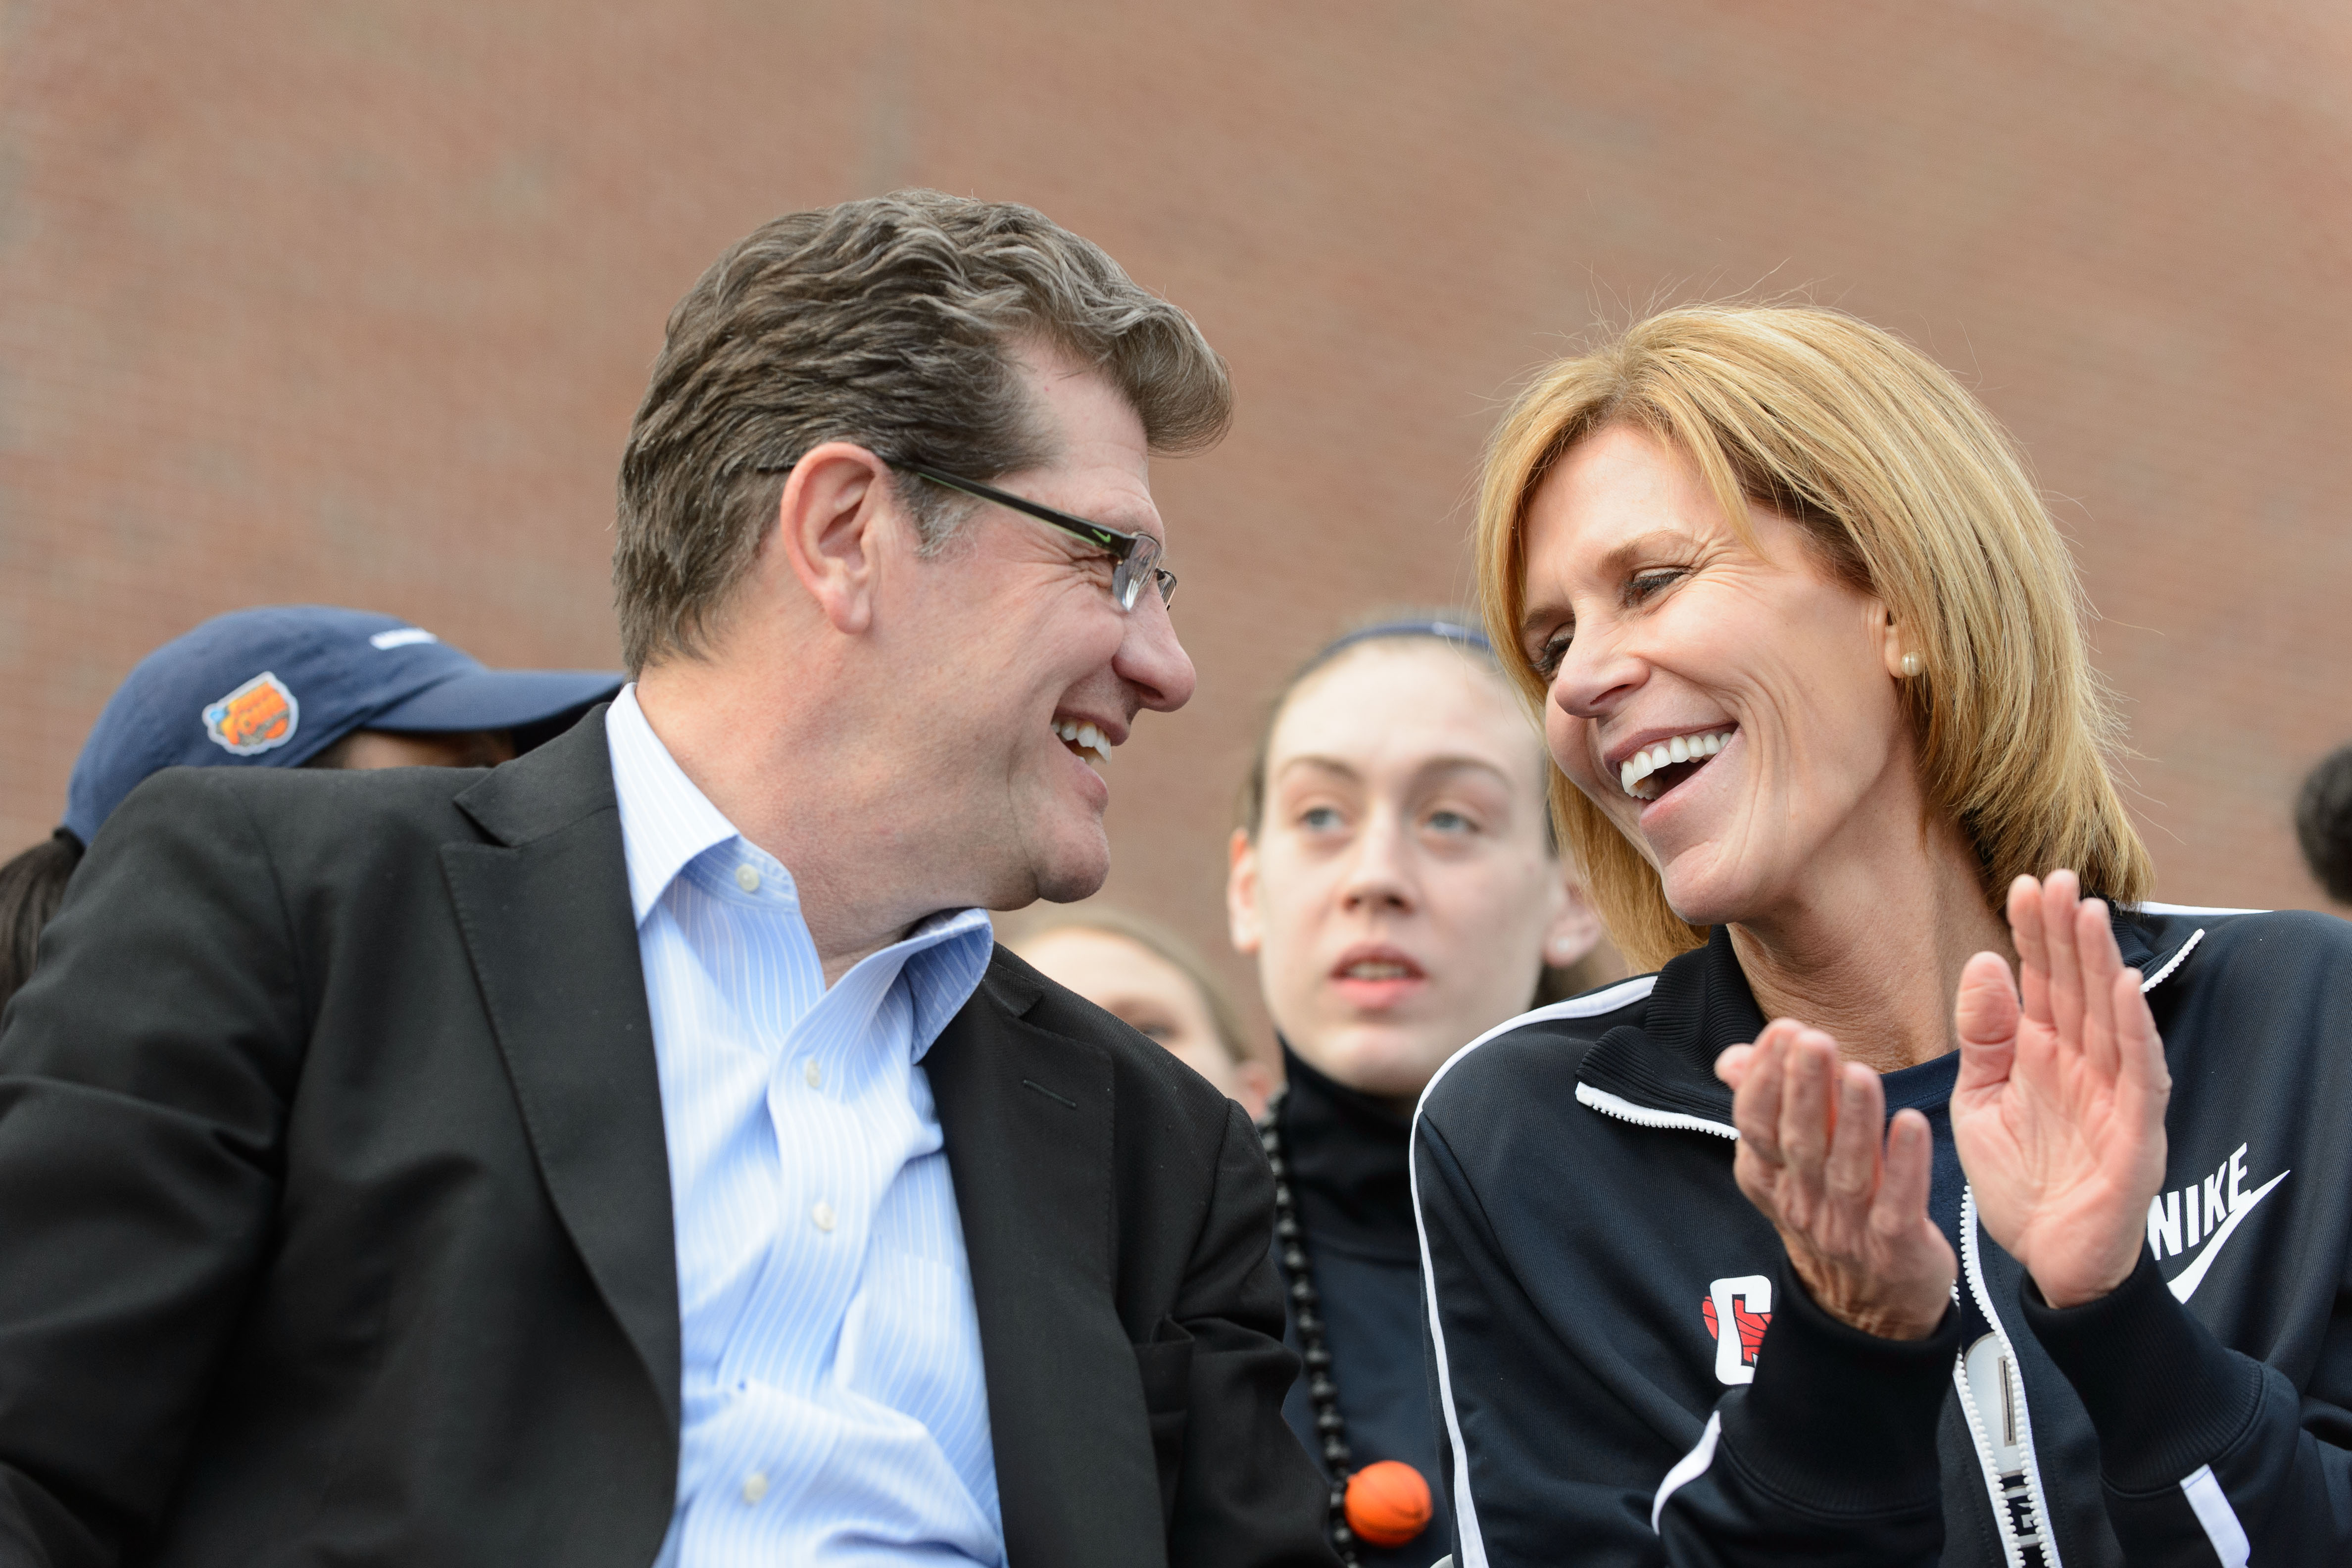 Coach Geno Auriemma and associate head coach Chris Dailey share a laugh during a rally held along Fairfield Way on April 10, 2013 to celebrate the Women's Basketball win over Louisville. (Peter Morenus/UConn Photo)